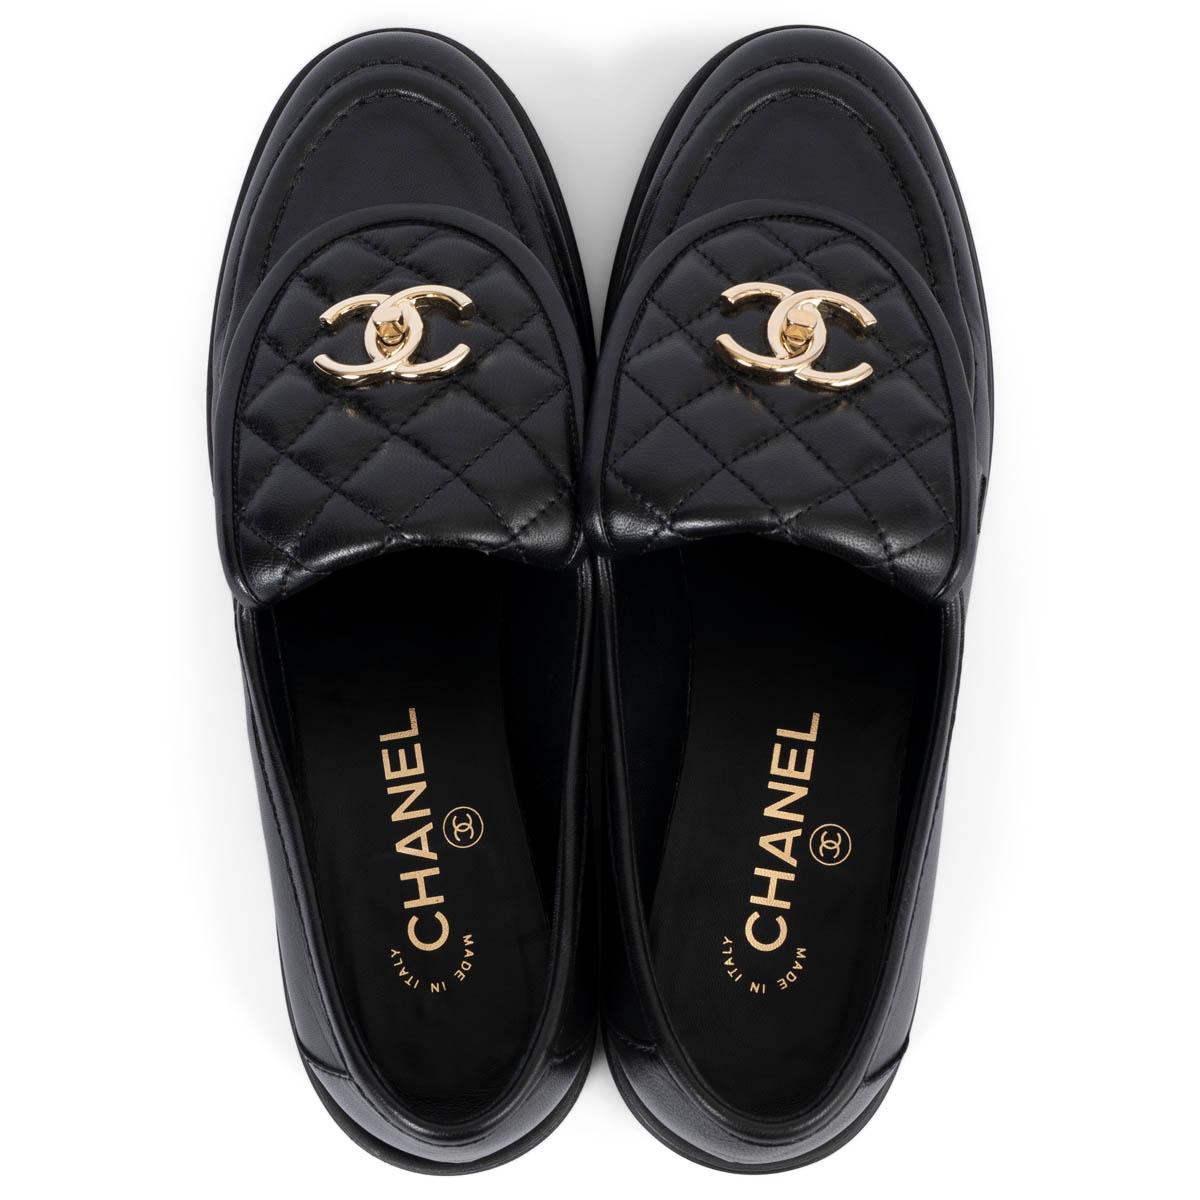 CHANEL black leather REV TURNLOCK Loafers Shoes 39 2